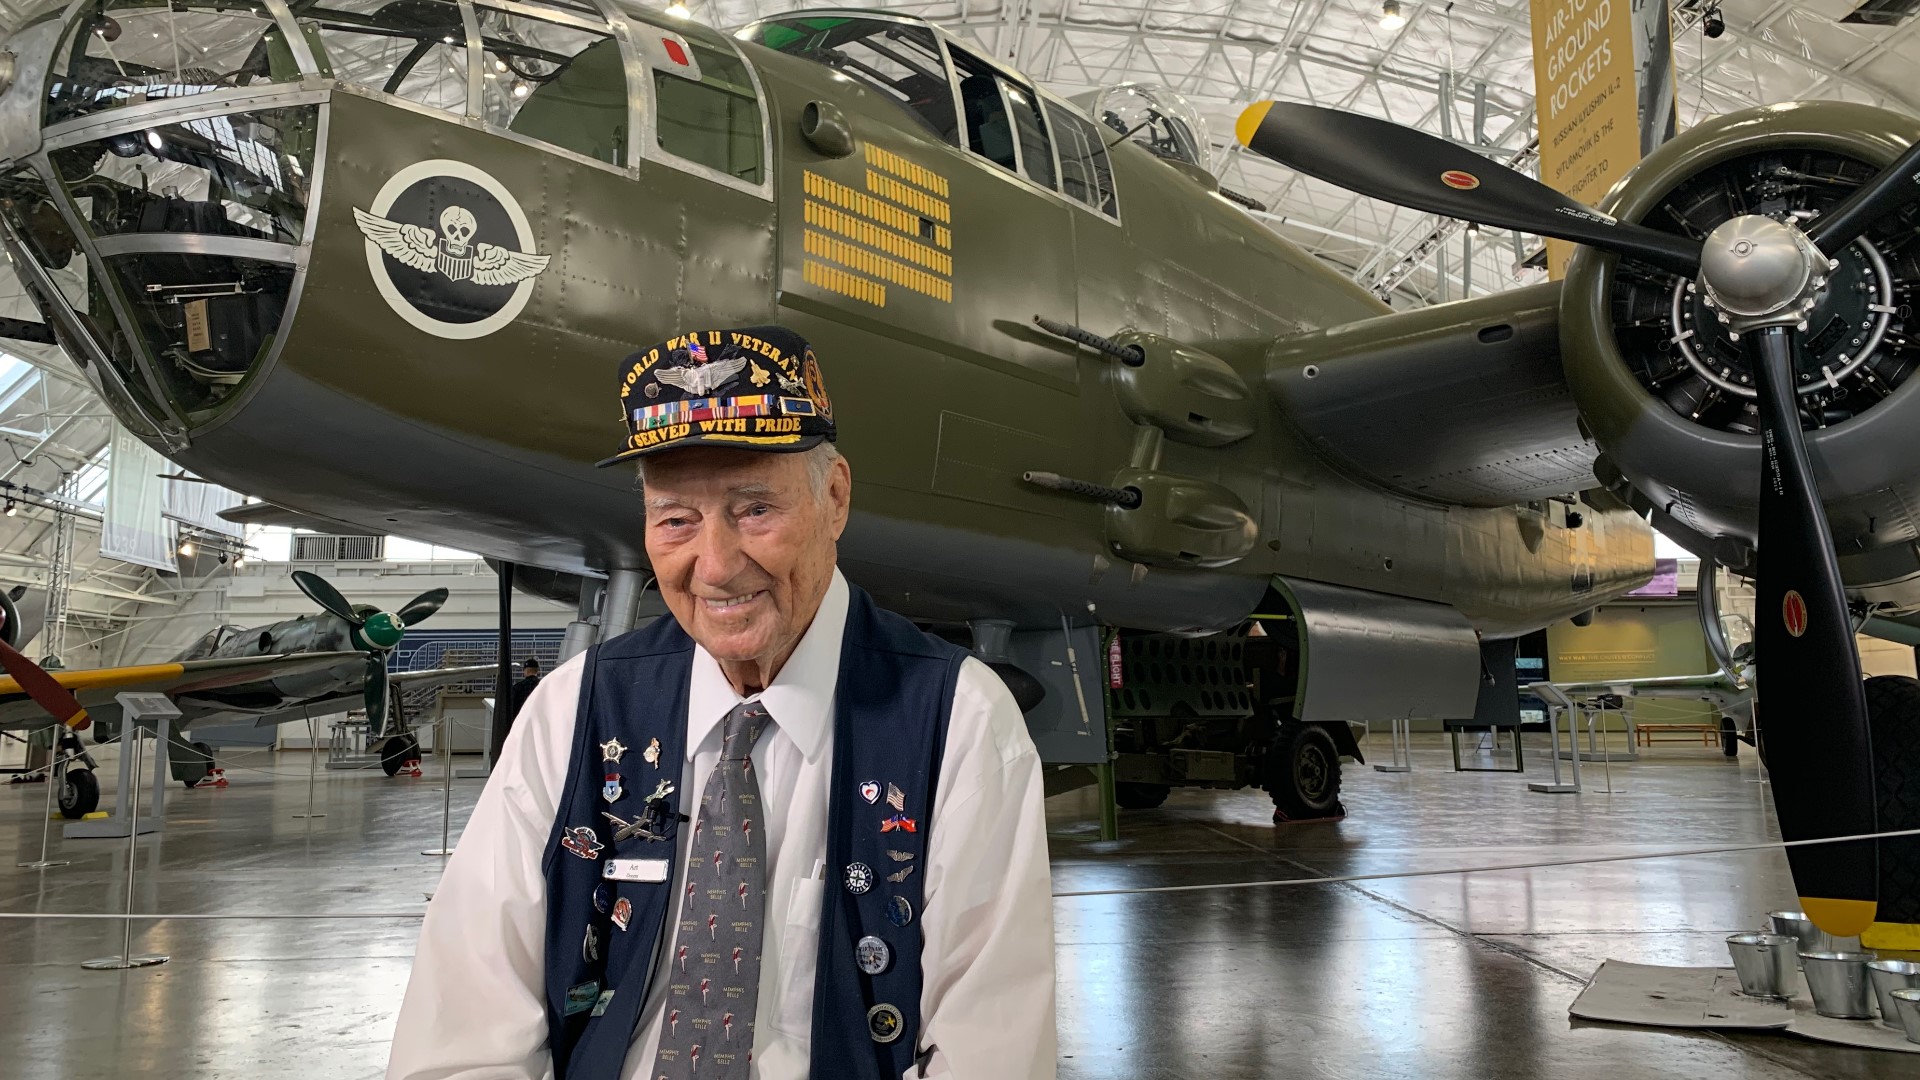 Tells tails of a hole in his B-17...and in his neck at Everett's Flying Heritage and Combat Armor Museum